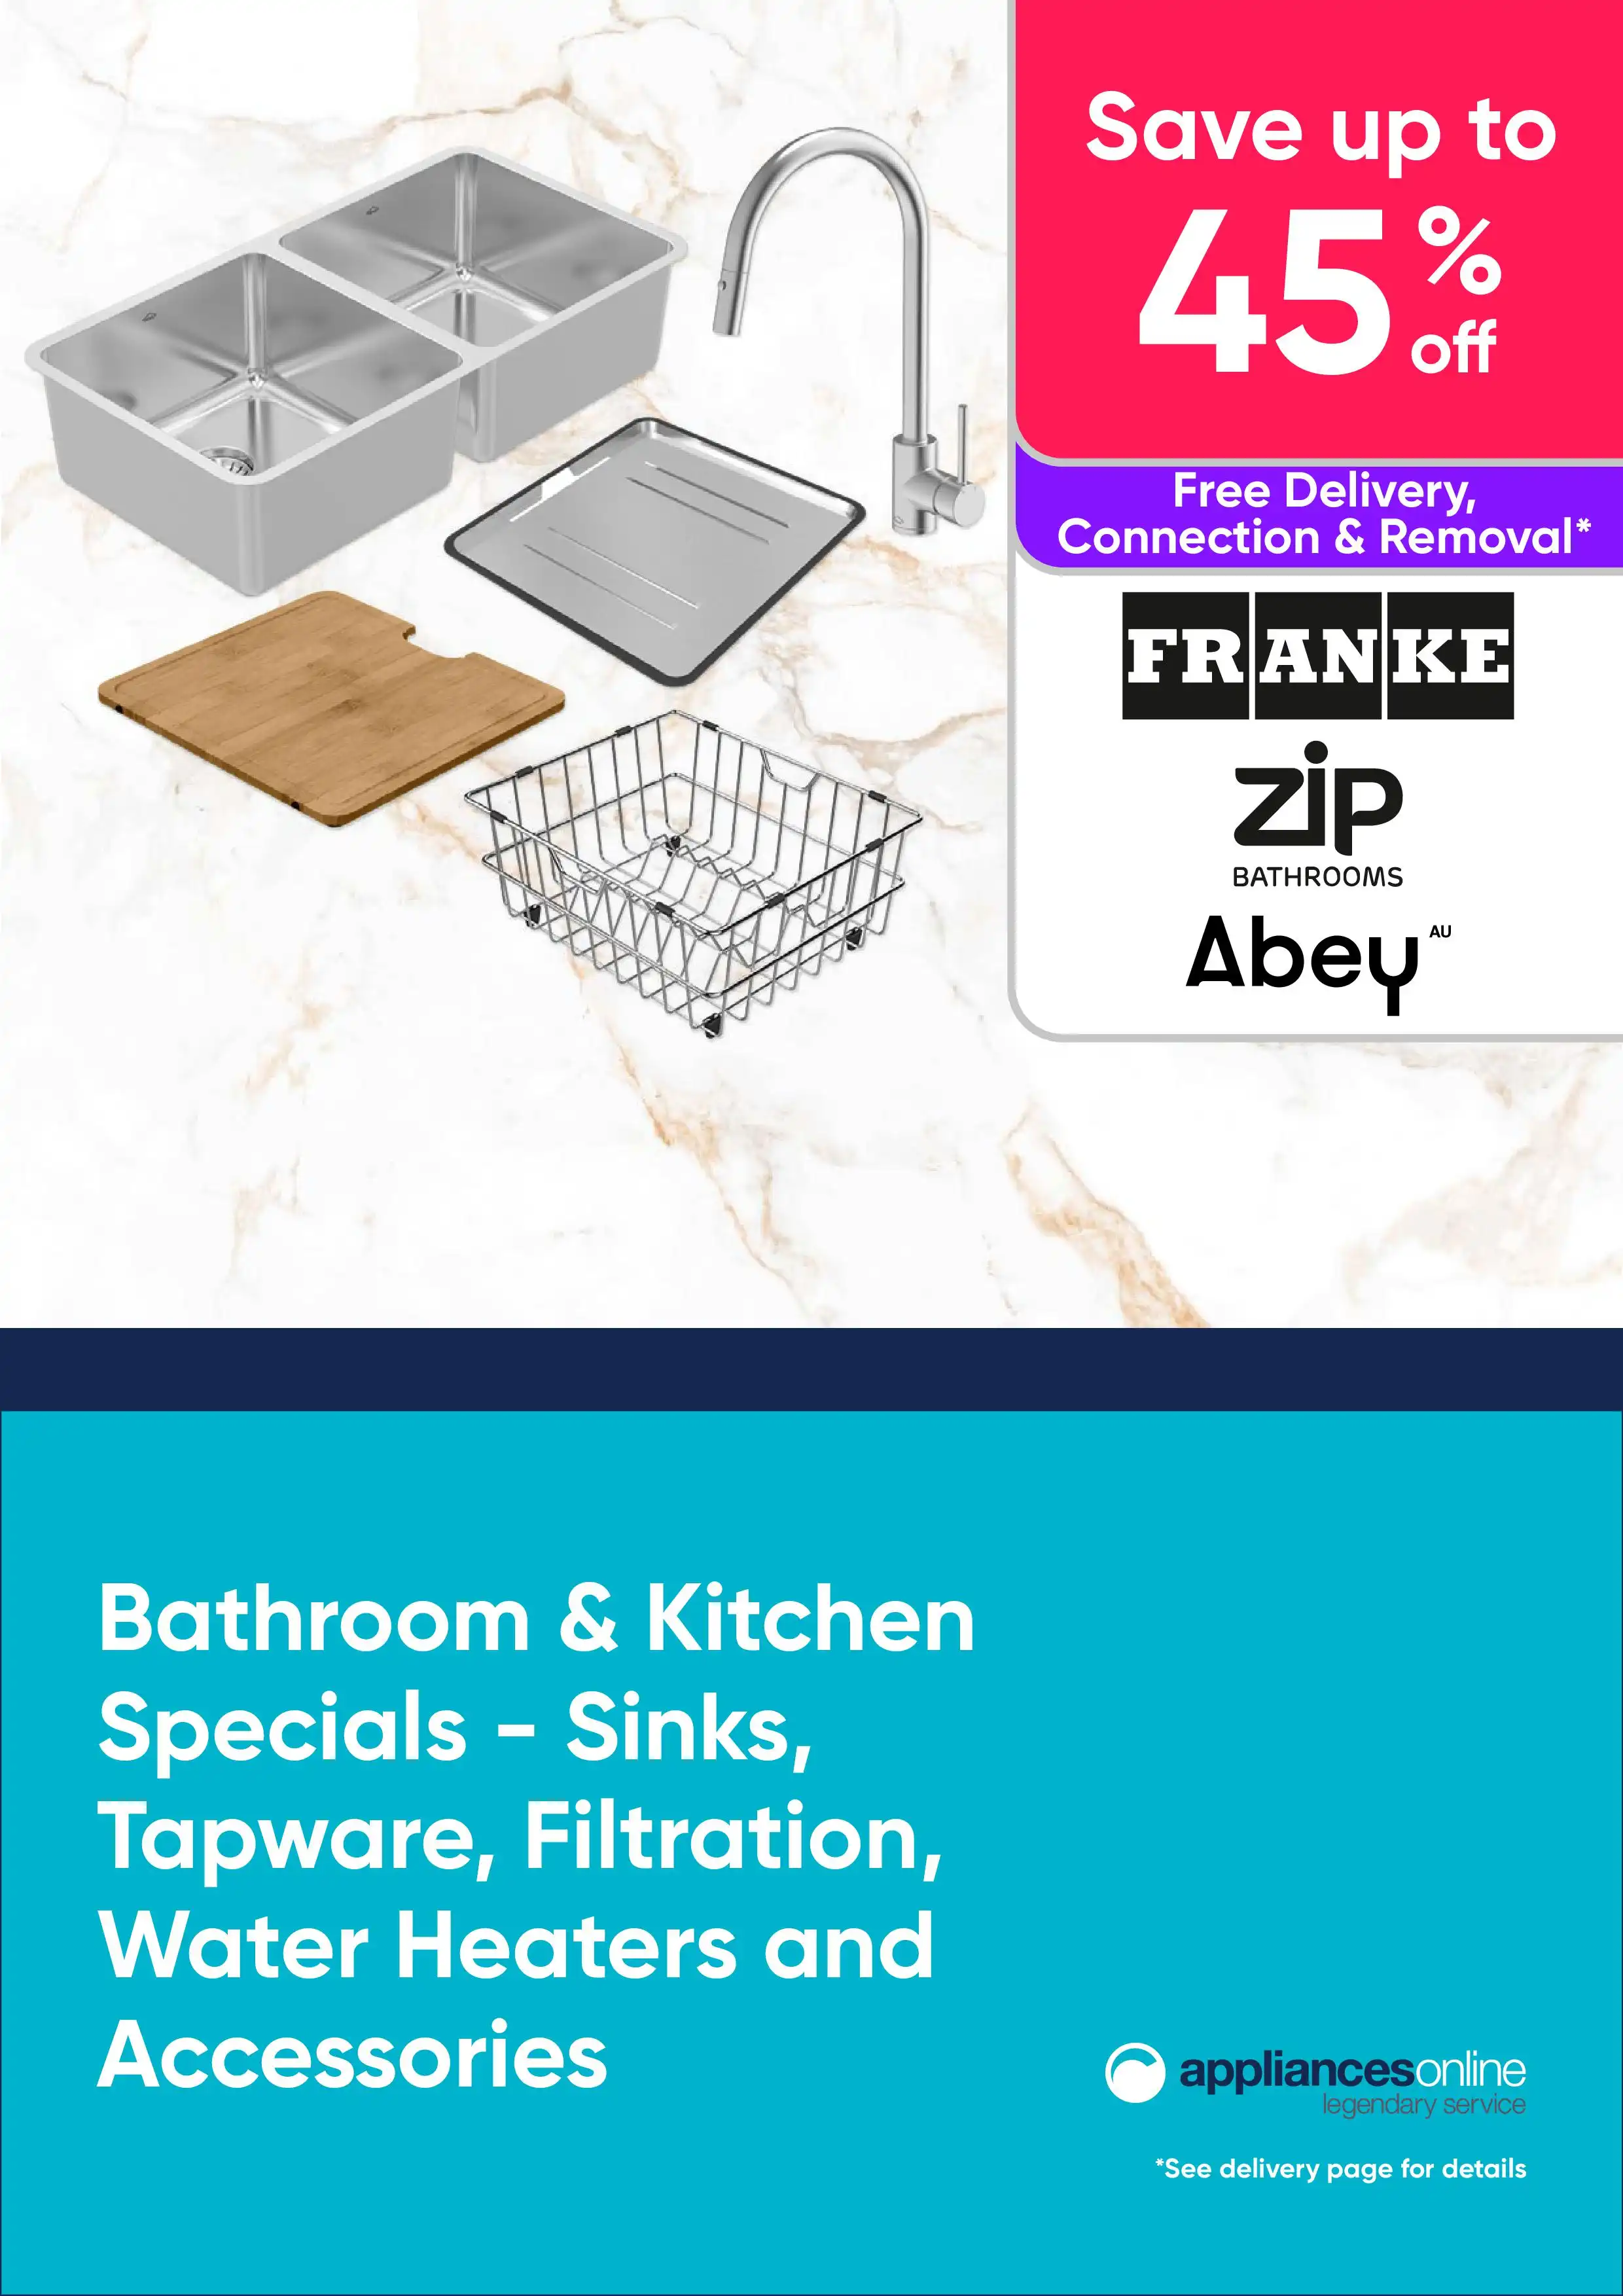 Appliances Online Bathroom Kitchen Specials - Save Up to 45% RRP On Sinks, Tapware and Accessories